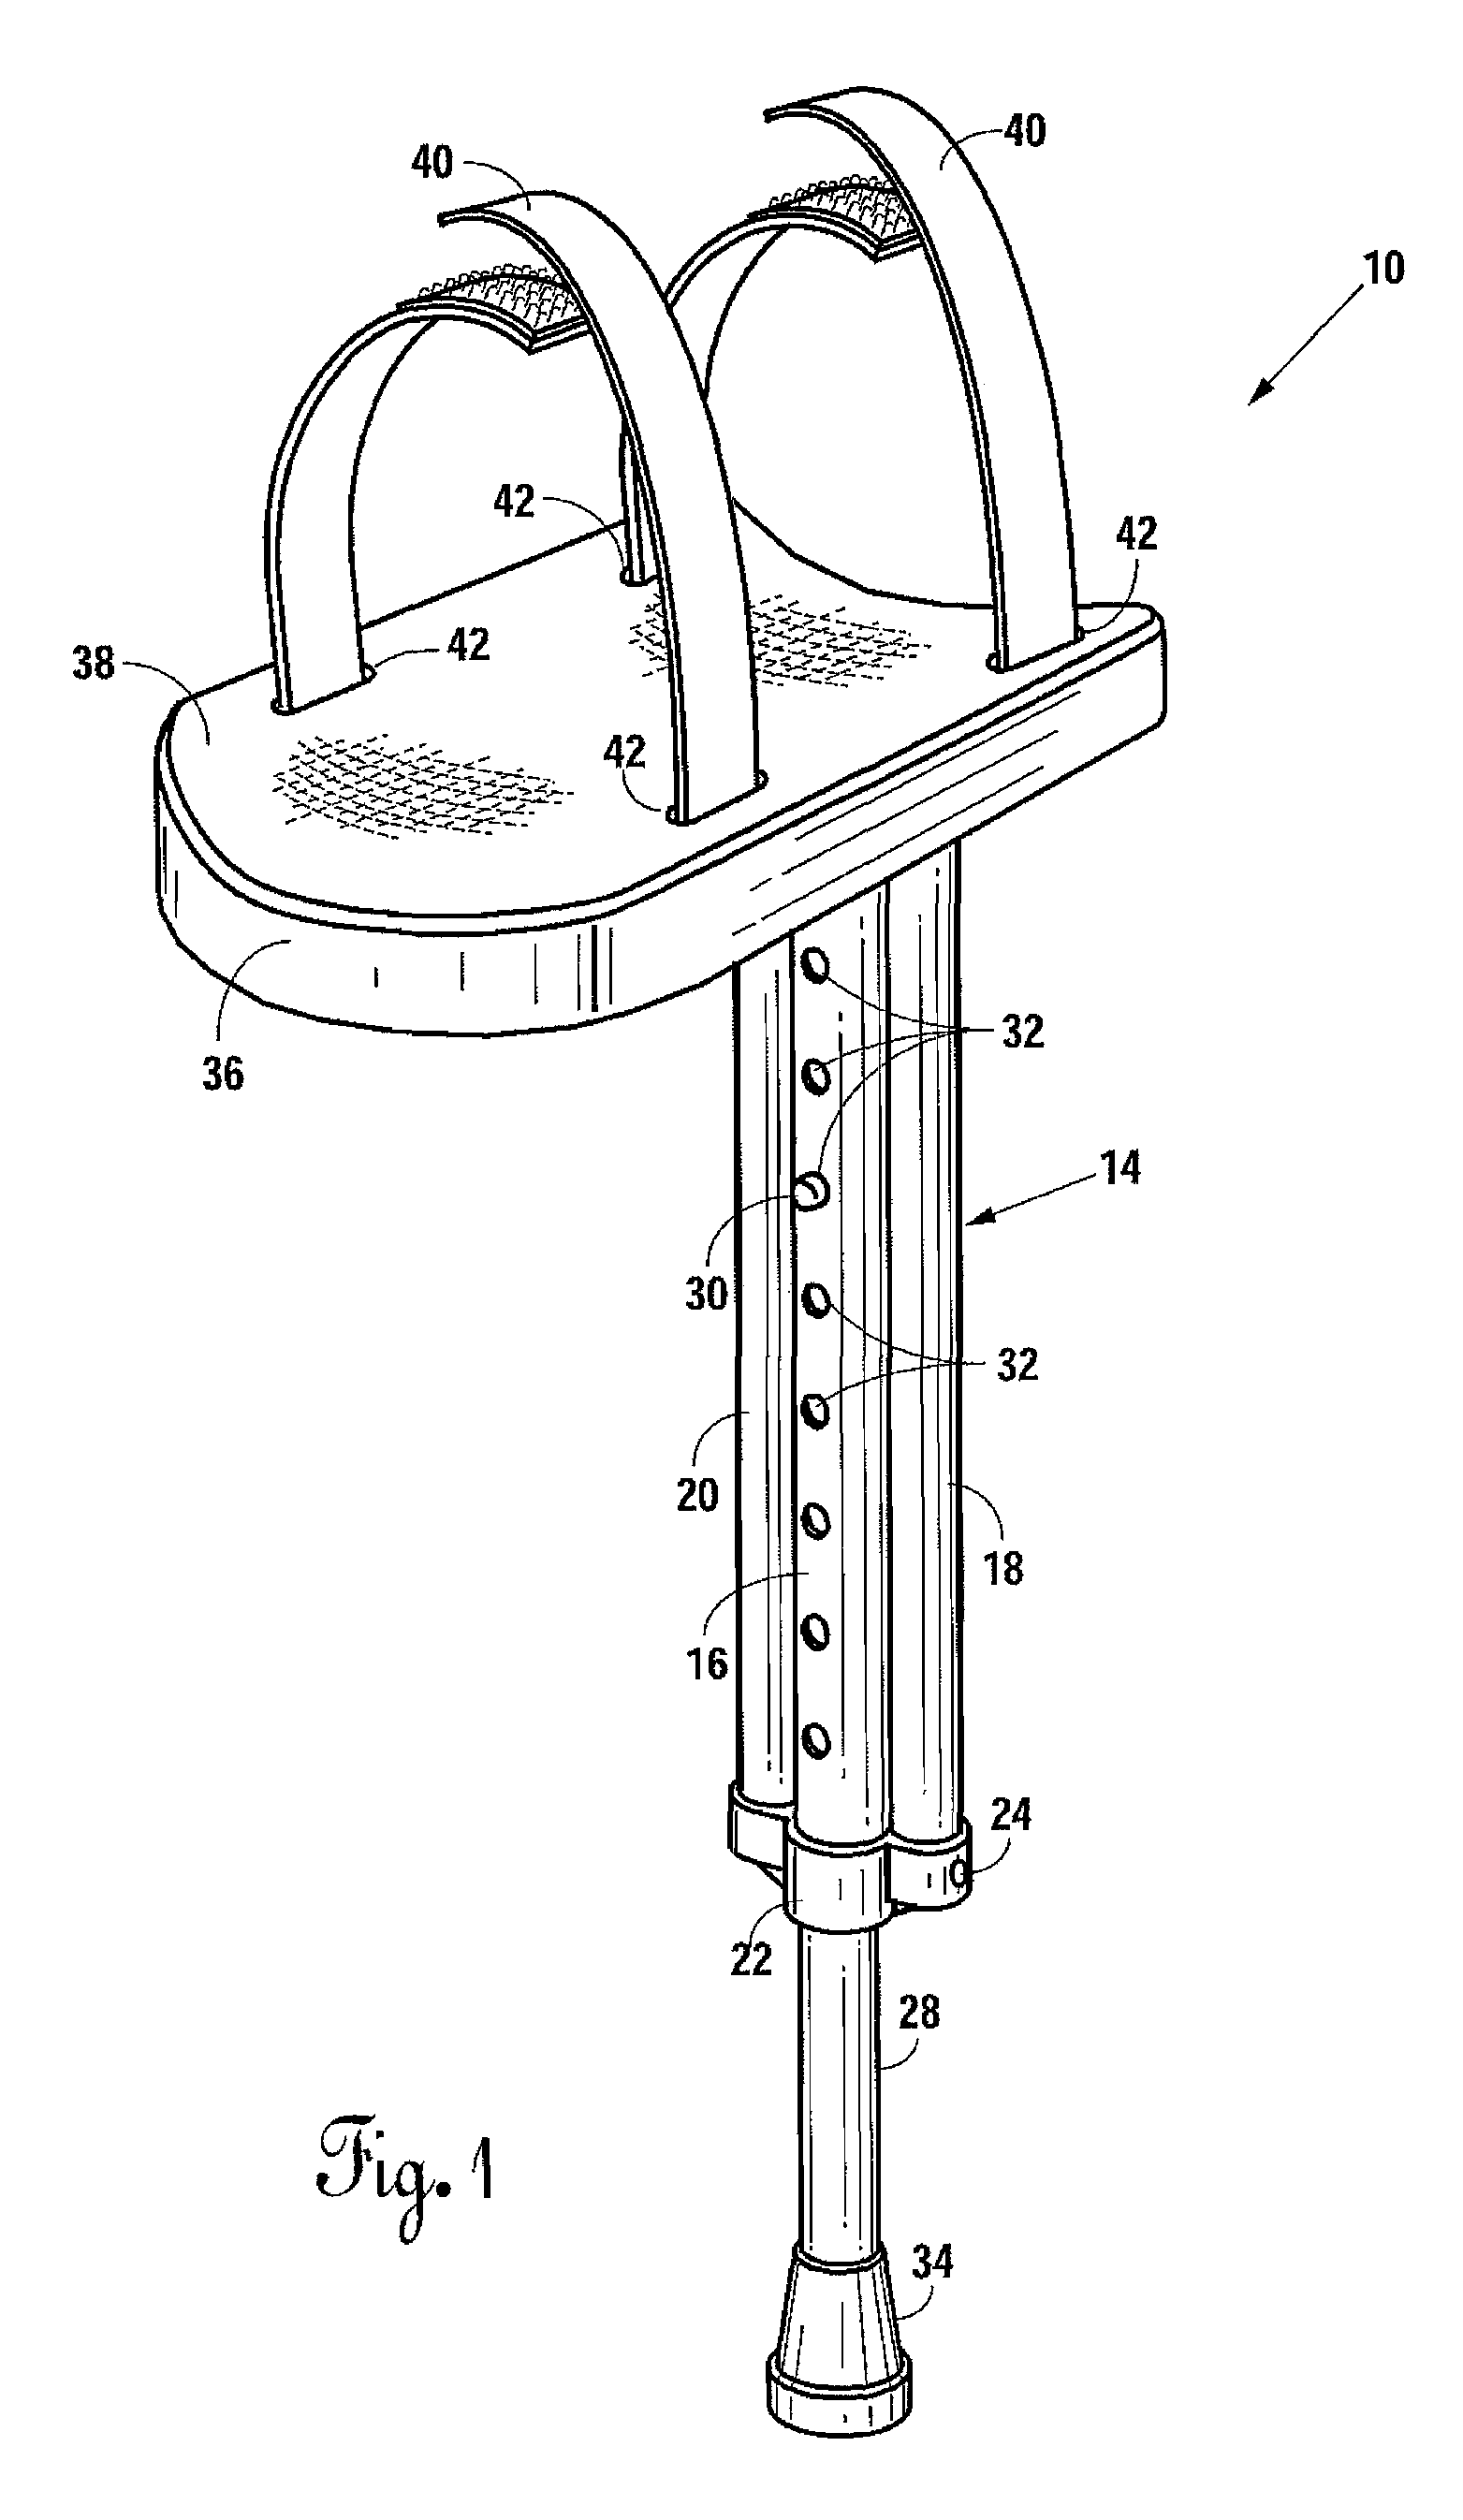 Adjustable support for a residual limb of an amputee